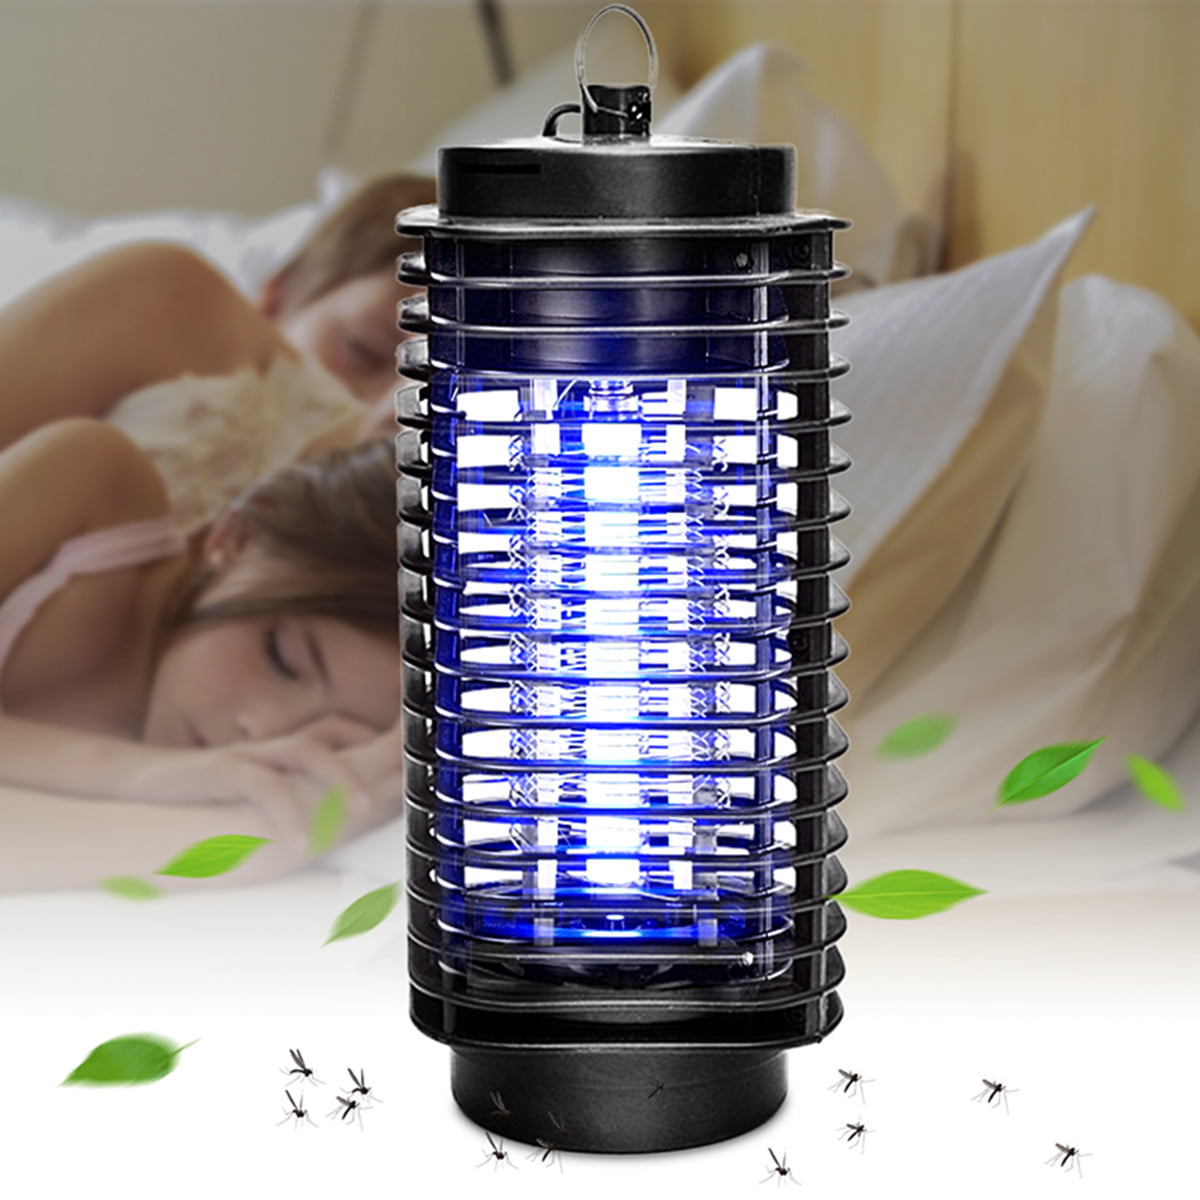 Safe Electric Mosquito Killer Lamp Indoor Fly Bug Insect Zapper Trap LED Light! 